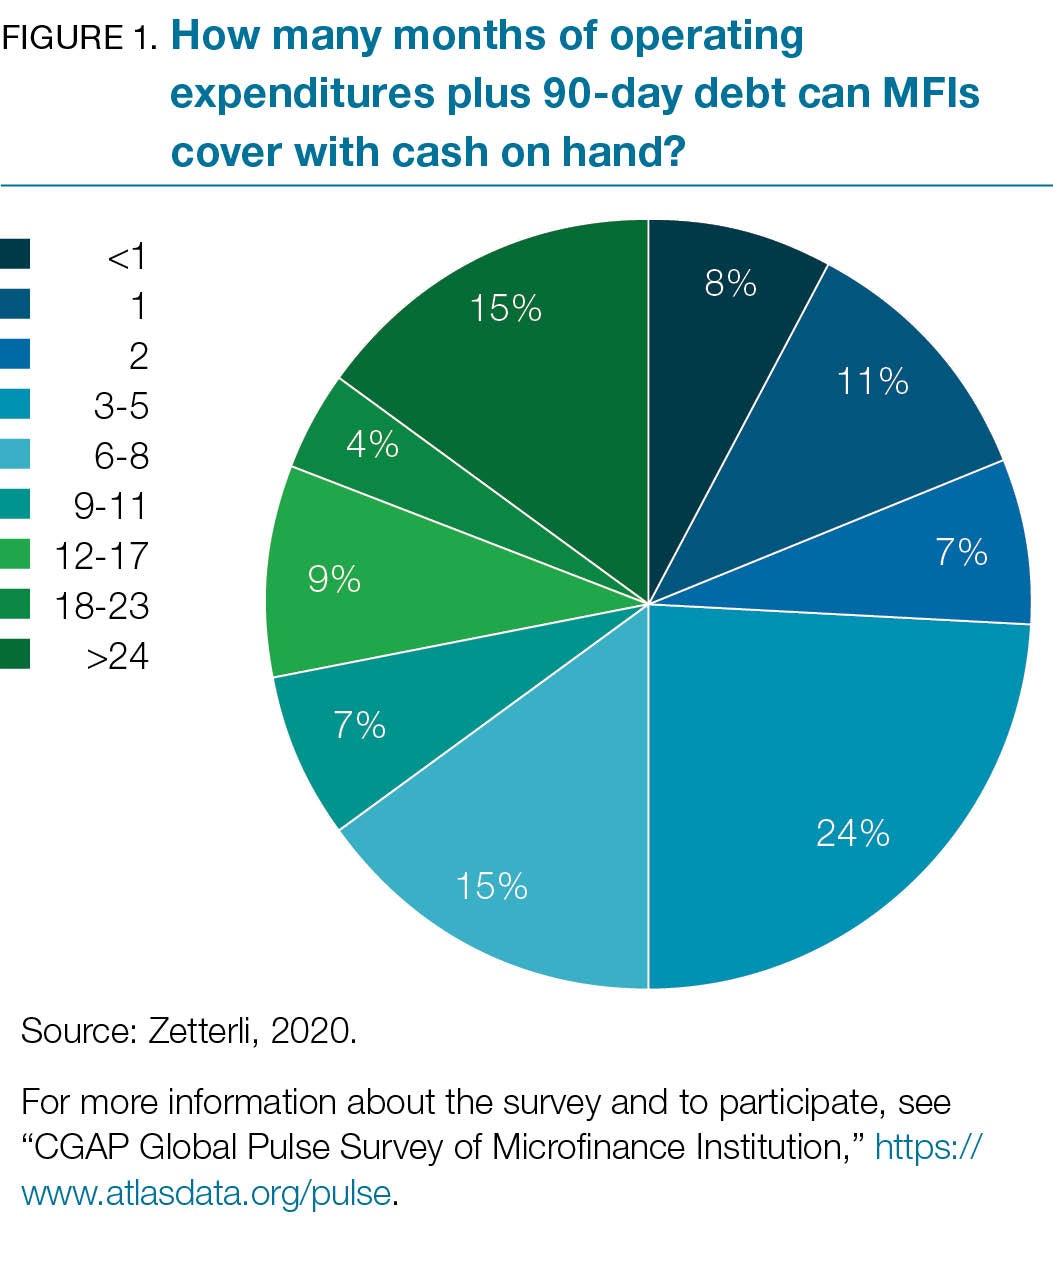 FIGURE 1. How many months of operating expenditures plus 90-day debt can MFIs cover with cash on hand?